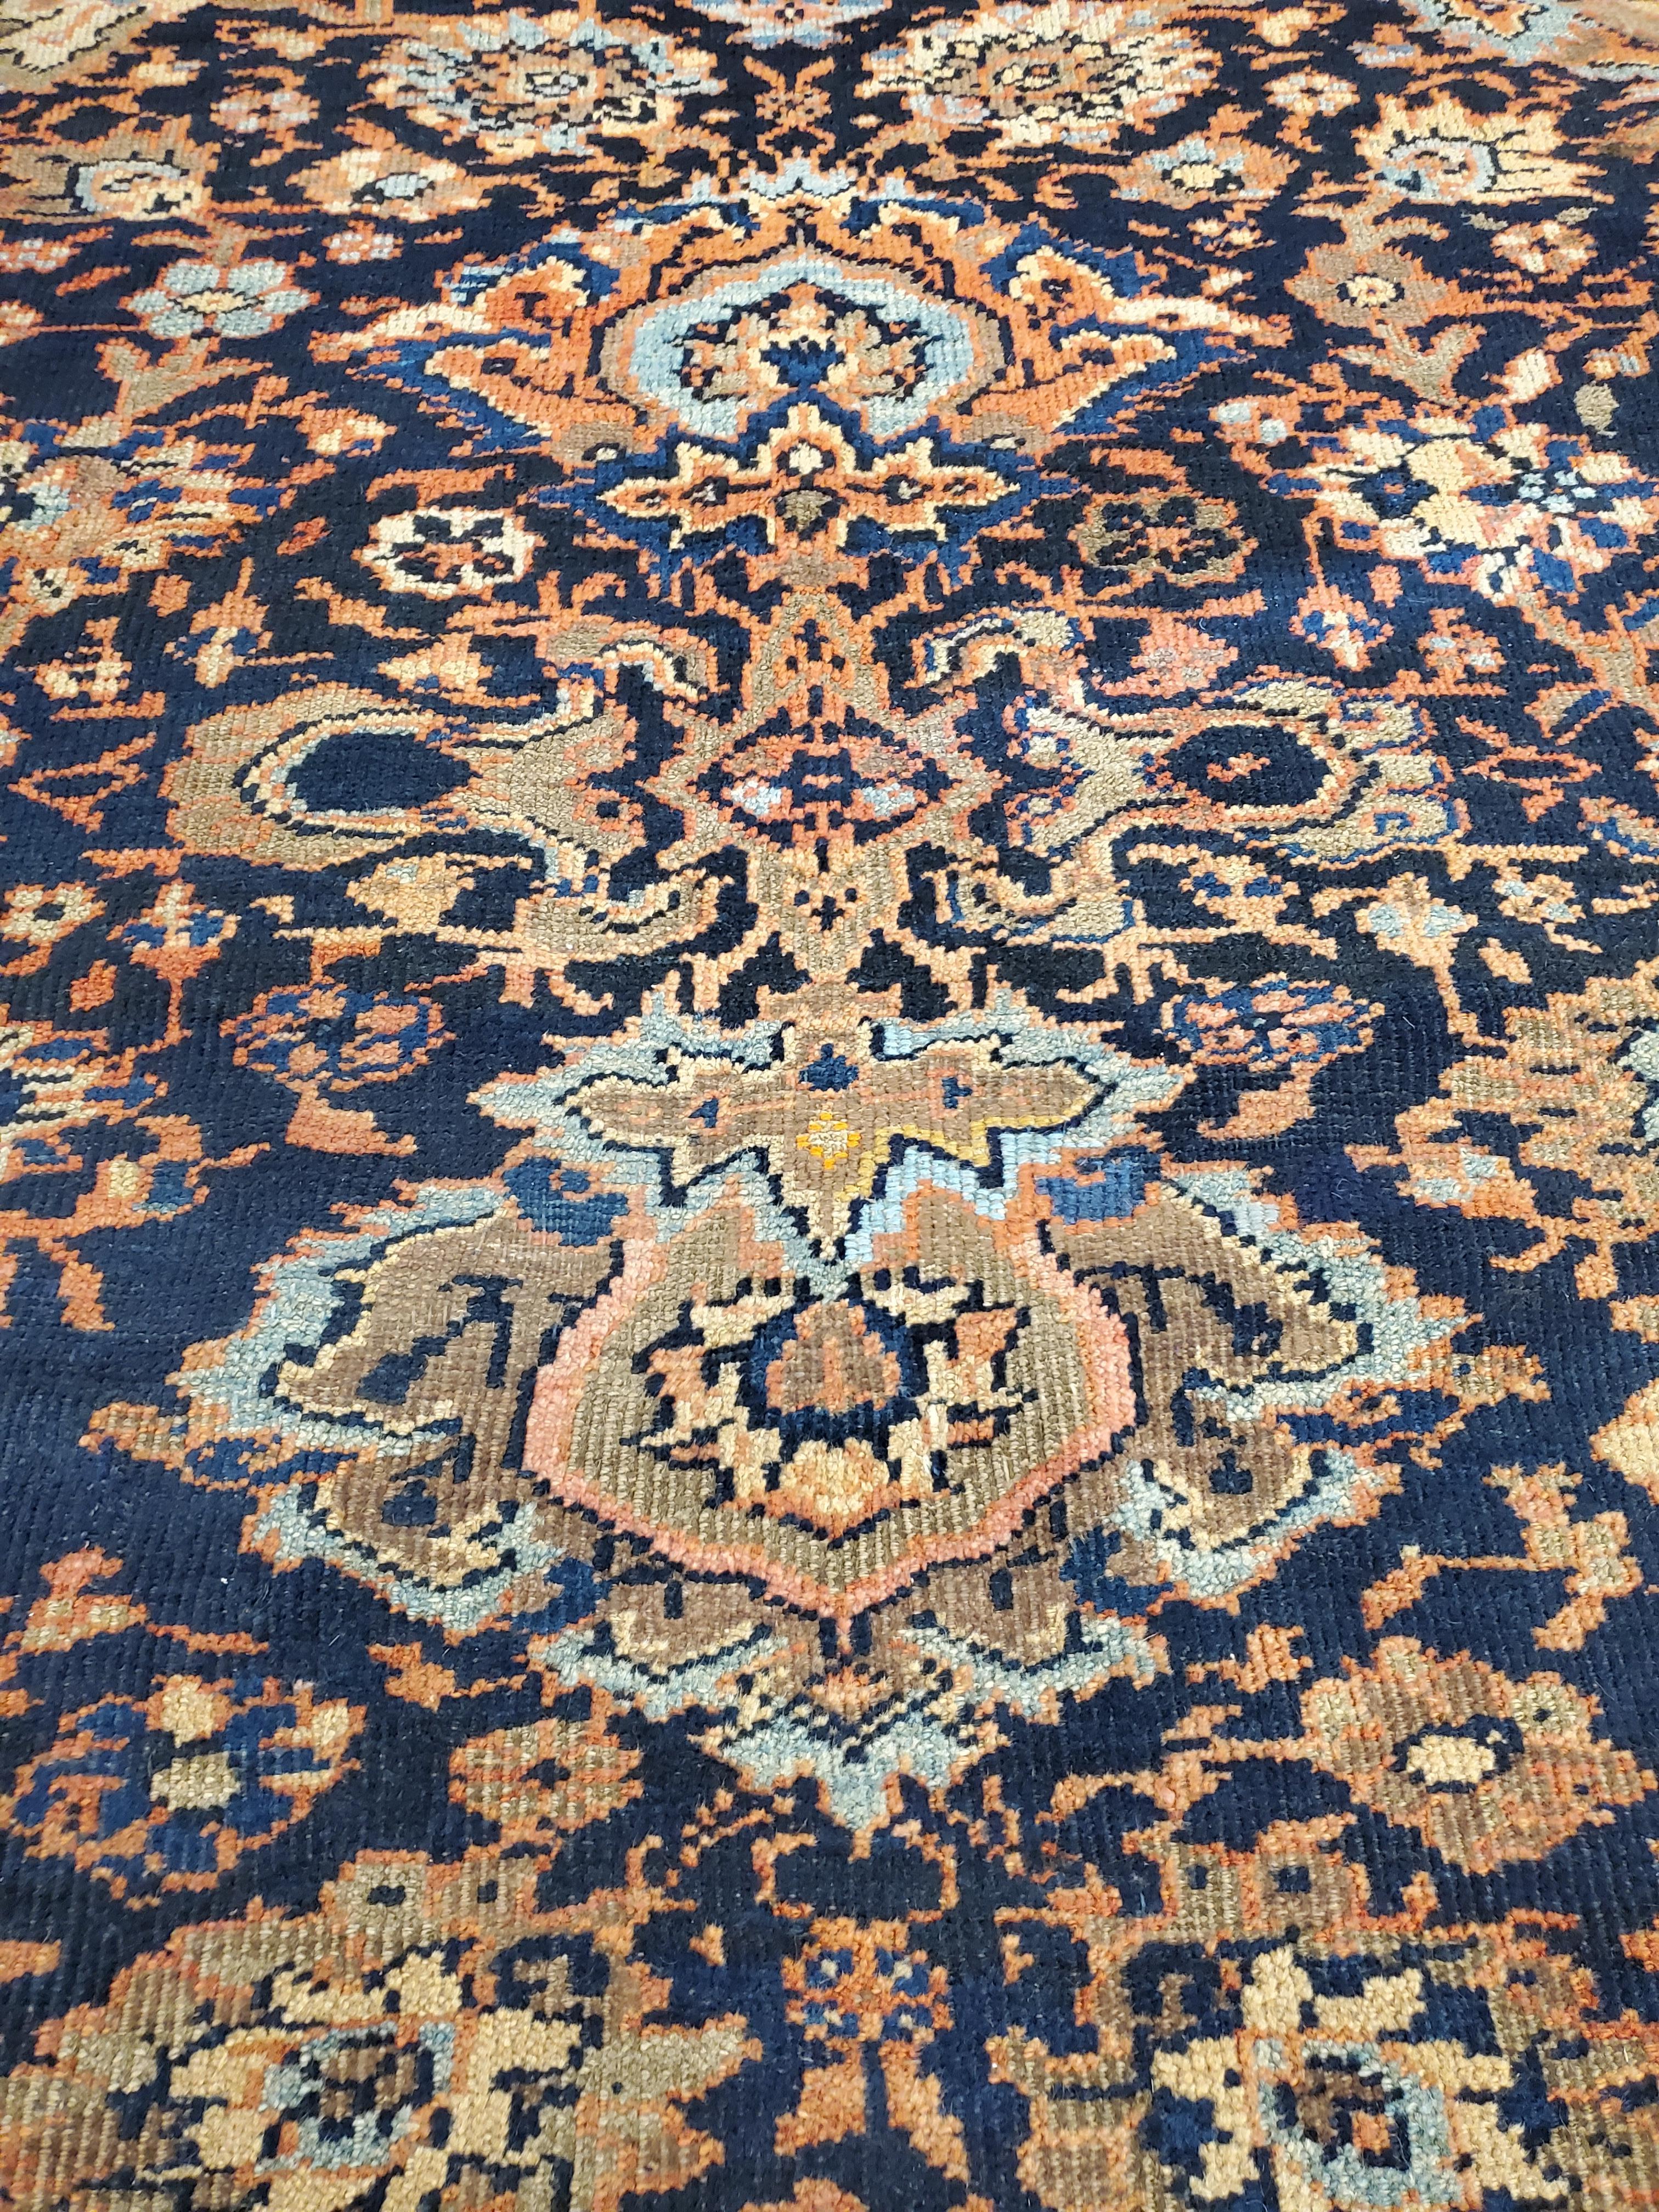 Antique Persian Sultanabad Carpet, Handmade Oriental Rug, Navy Blue, Rust, Gold For Sale 2